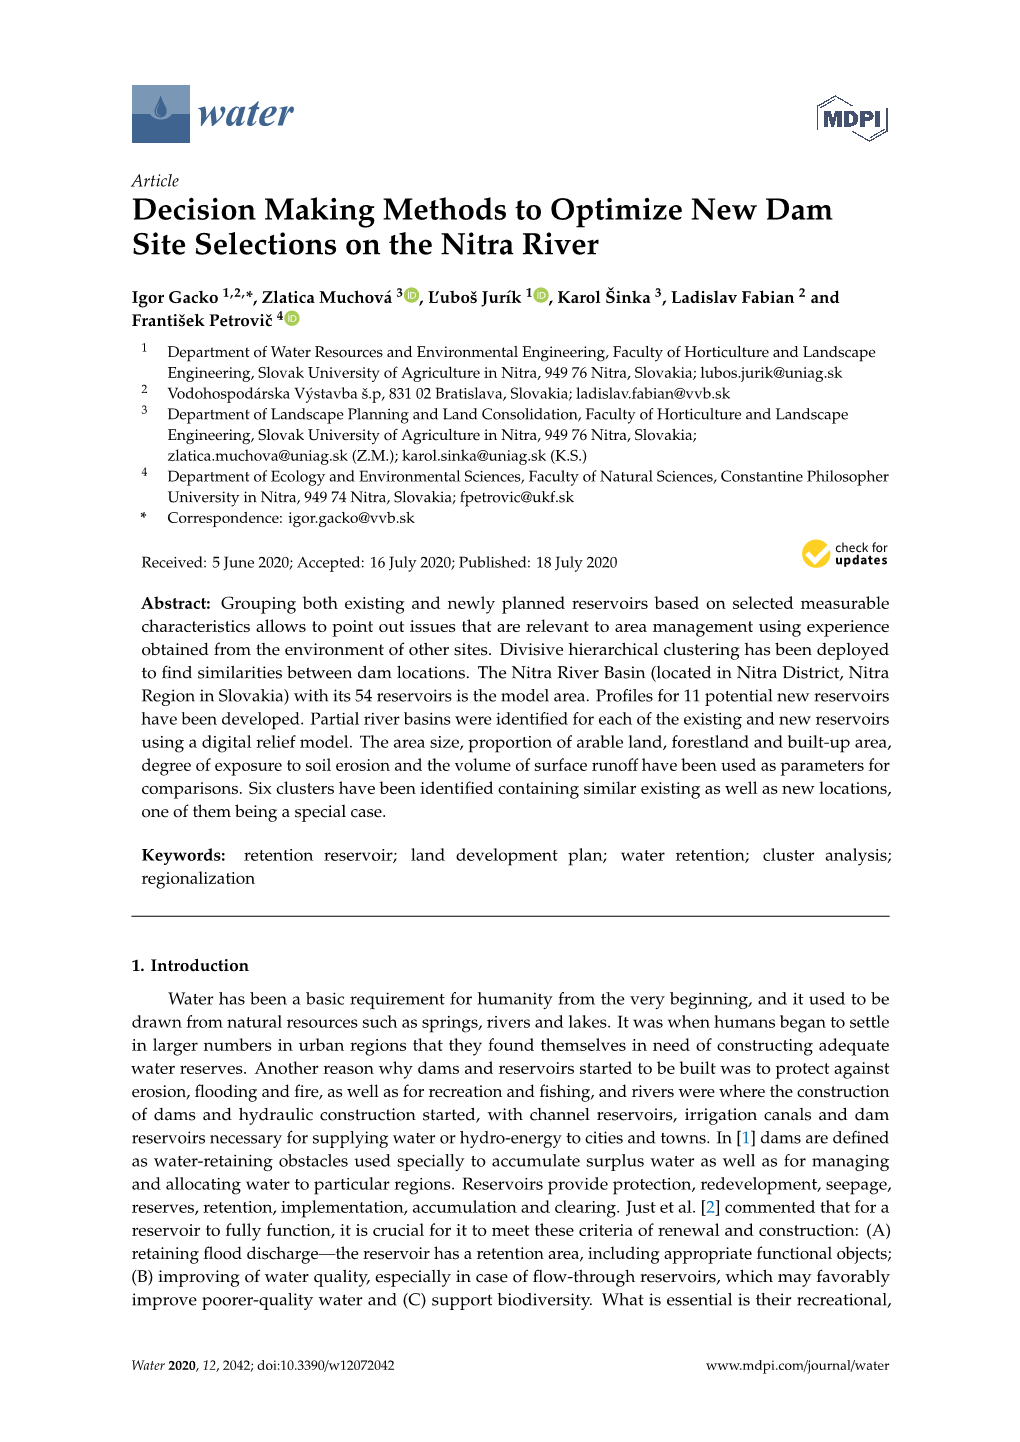 Decision Making Methods to Optimize New Dam Site Selections on the Nitra River